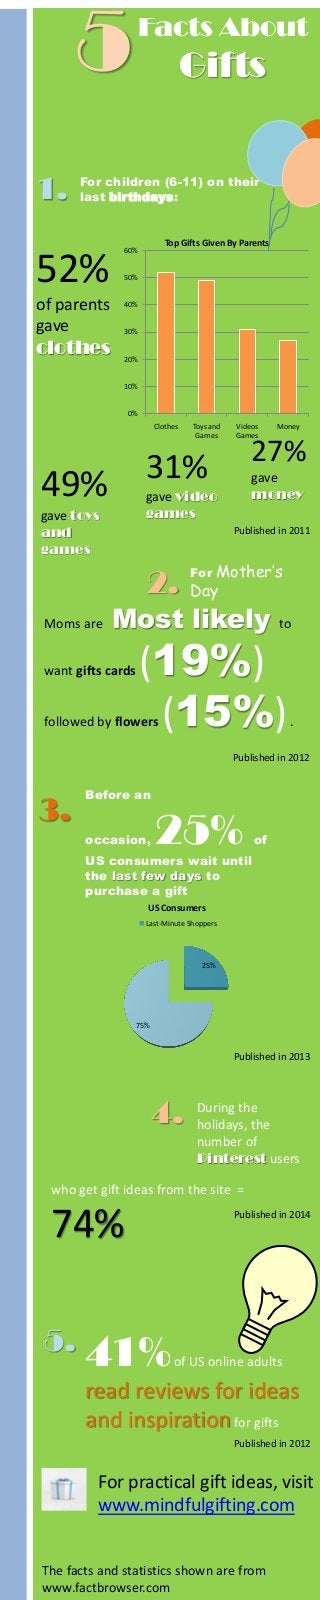 5
1.

Facts About

Gifts

For children (6-11) on their
last birthdays:

52%
of parents
gave

Top Gifts Given By Parents

60%
50%
40%
30%

clothes
20%
10%
0%
Clothes

Videos
Games

gave
money

gave video
games

gave toys
and
games

Money

27%

31%

49%

Published in 2011

2.
Moms are

Toys and
Games

Mother’s
Day
For

Most likely

want gifts cards

to

(19%)
(15%)

followed by flowers

.

Published in 2012

3.

Before an
occasion,

25%

of

US consumers wait until
the last few days to
purchase a gift
US Consumers
Last-Minute Shoppers

25%

75%

Published in 2013

4.

During the
holidays, the
number of
Pinterest users

who get gift ideas from the site =

74%

Published in 2014

5. 41% of US online adults
read reviews for ideas
and inspiration for gifts
Published in 2012

For practical gift ideas, visit
www.mindfulgifting.com
The facts and statistics shown are from
www.factbrowser.com

 